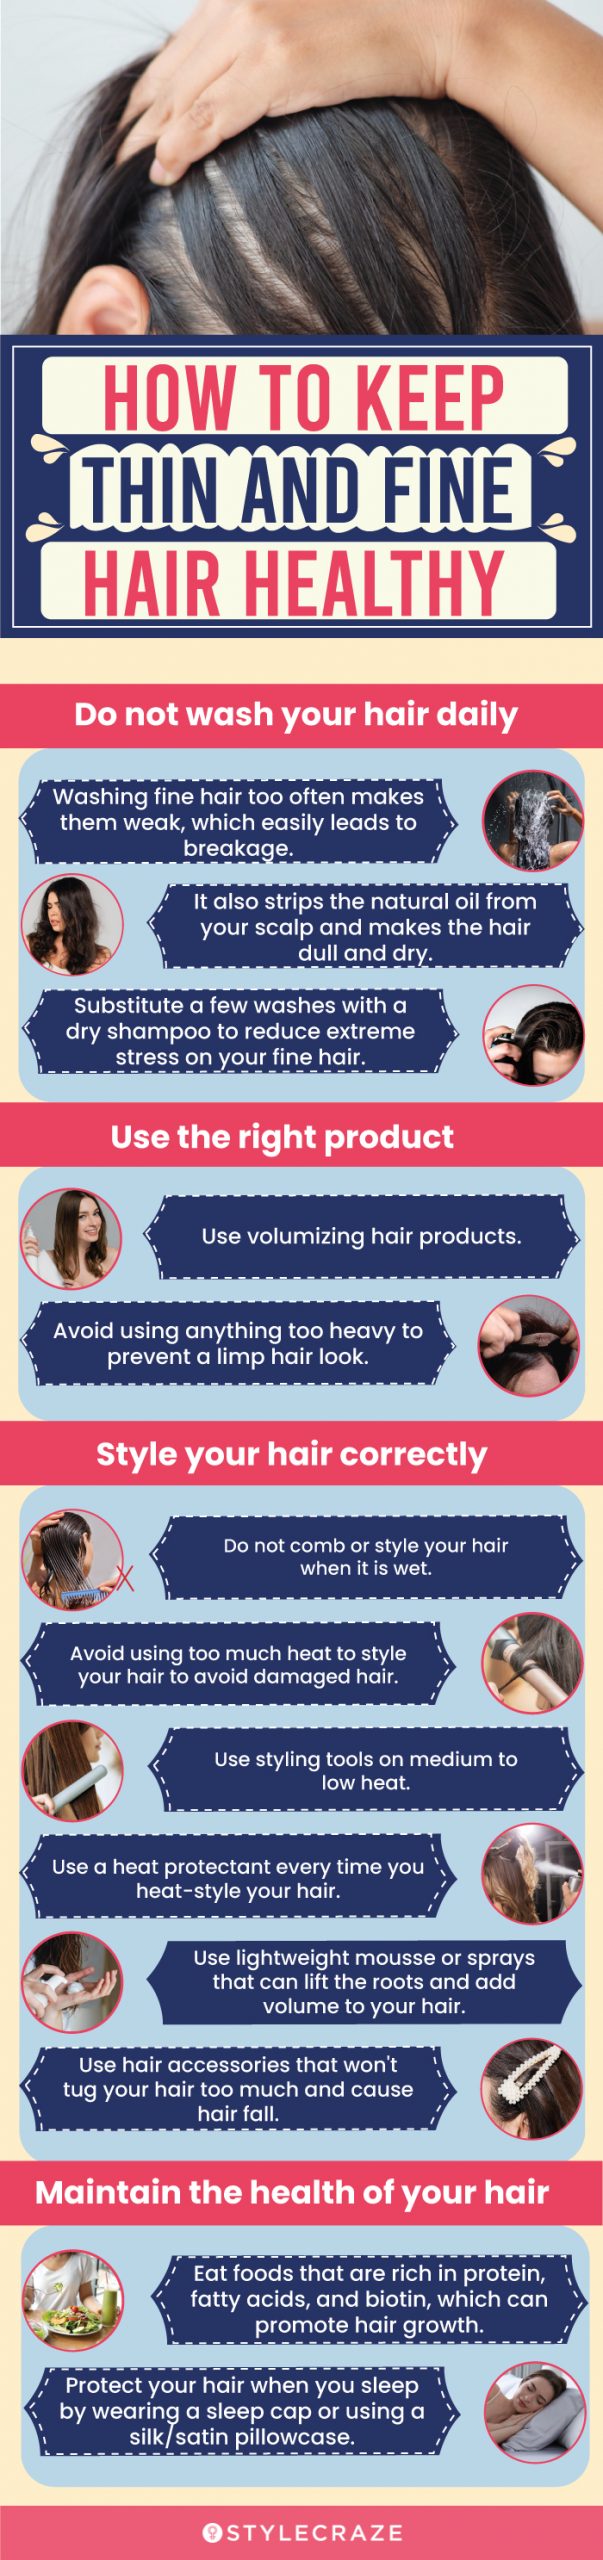 How To Keep Thin and Fine Hair Healthy (infographic)